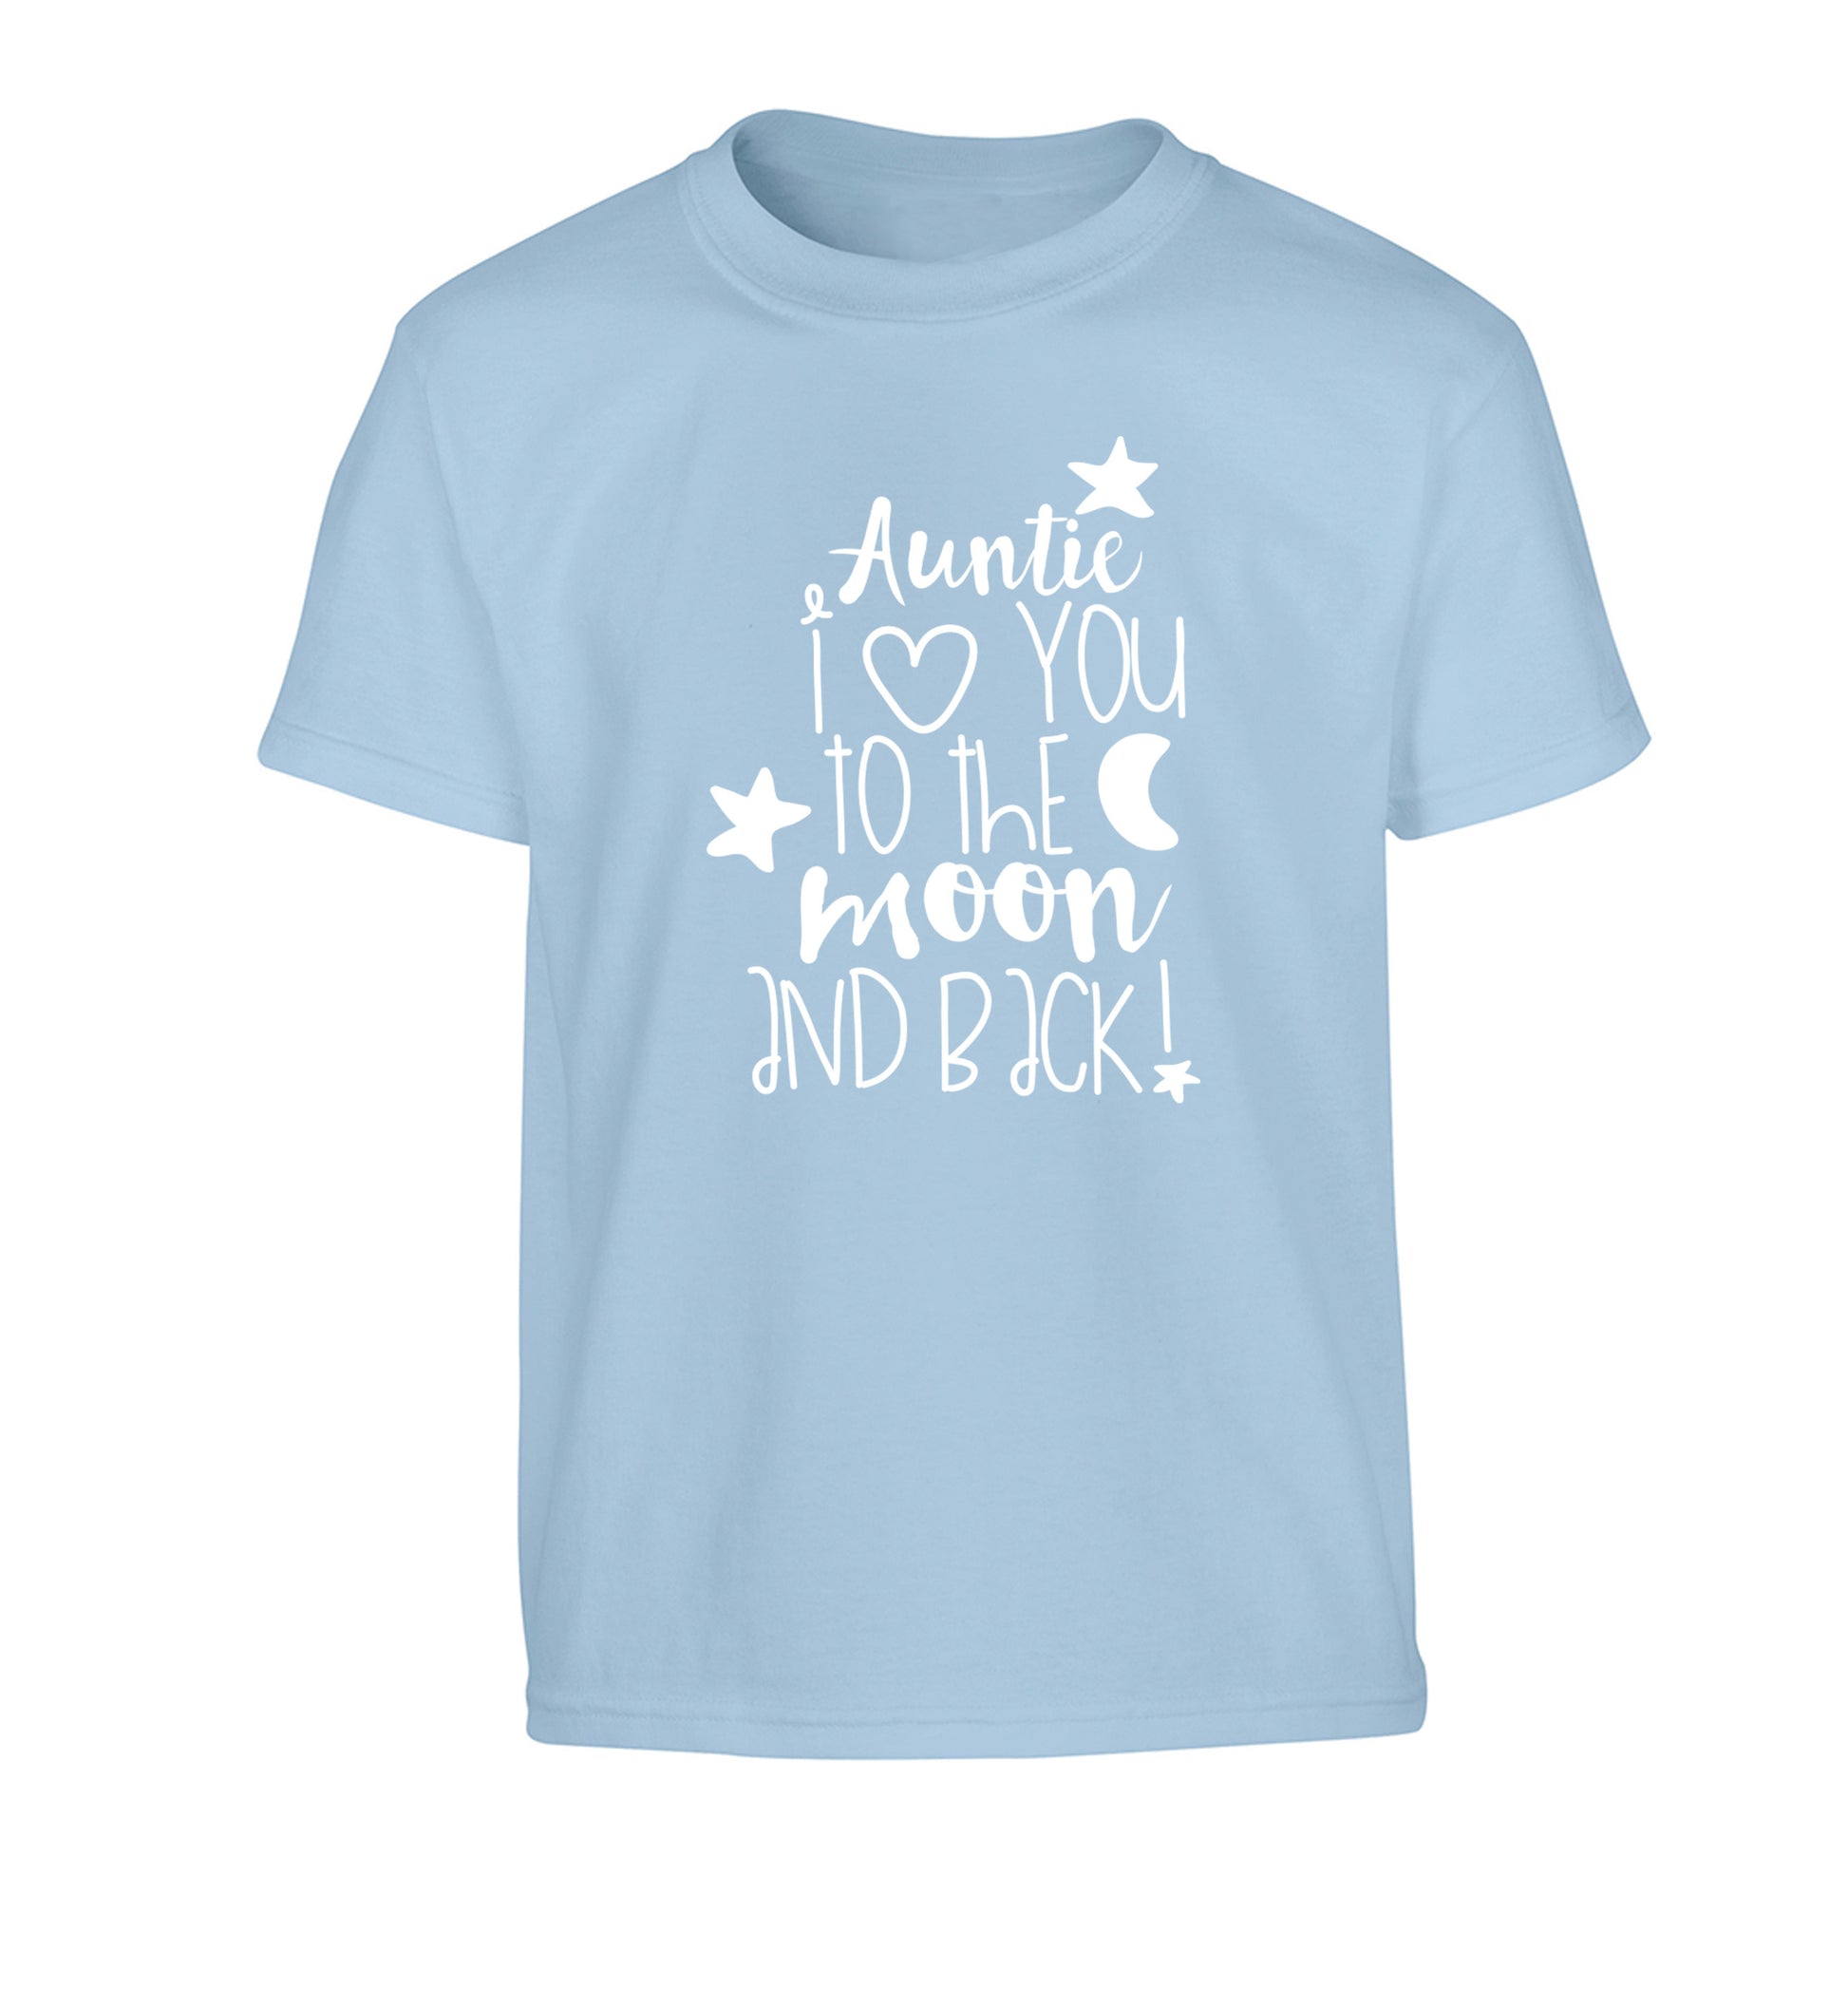 Auntie I love you to the moon and back Children's light blue Tshirt 12-14 Years